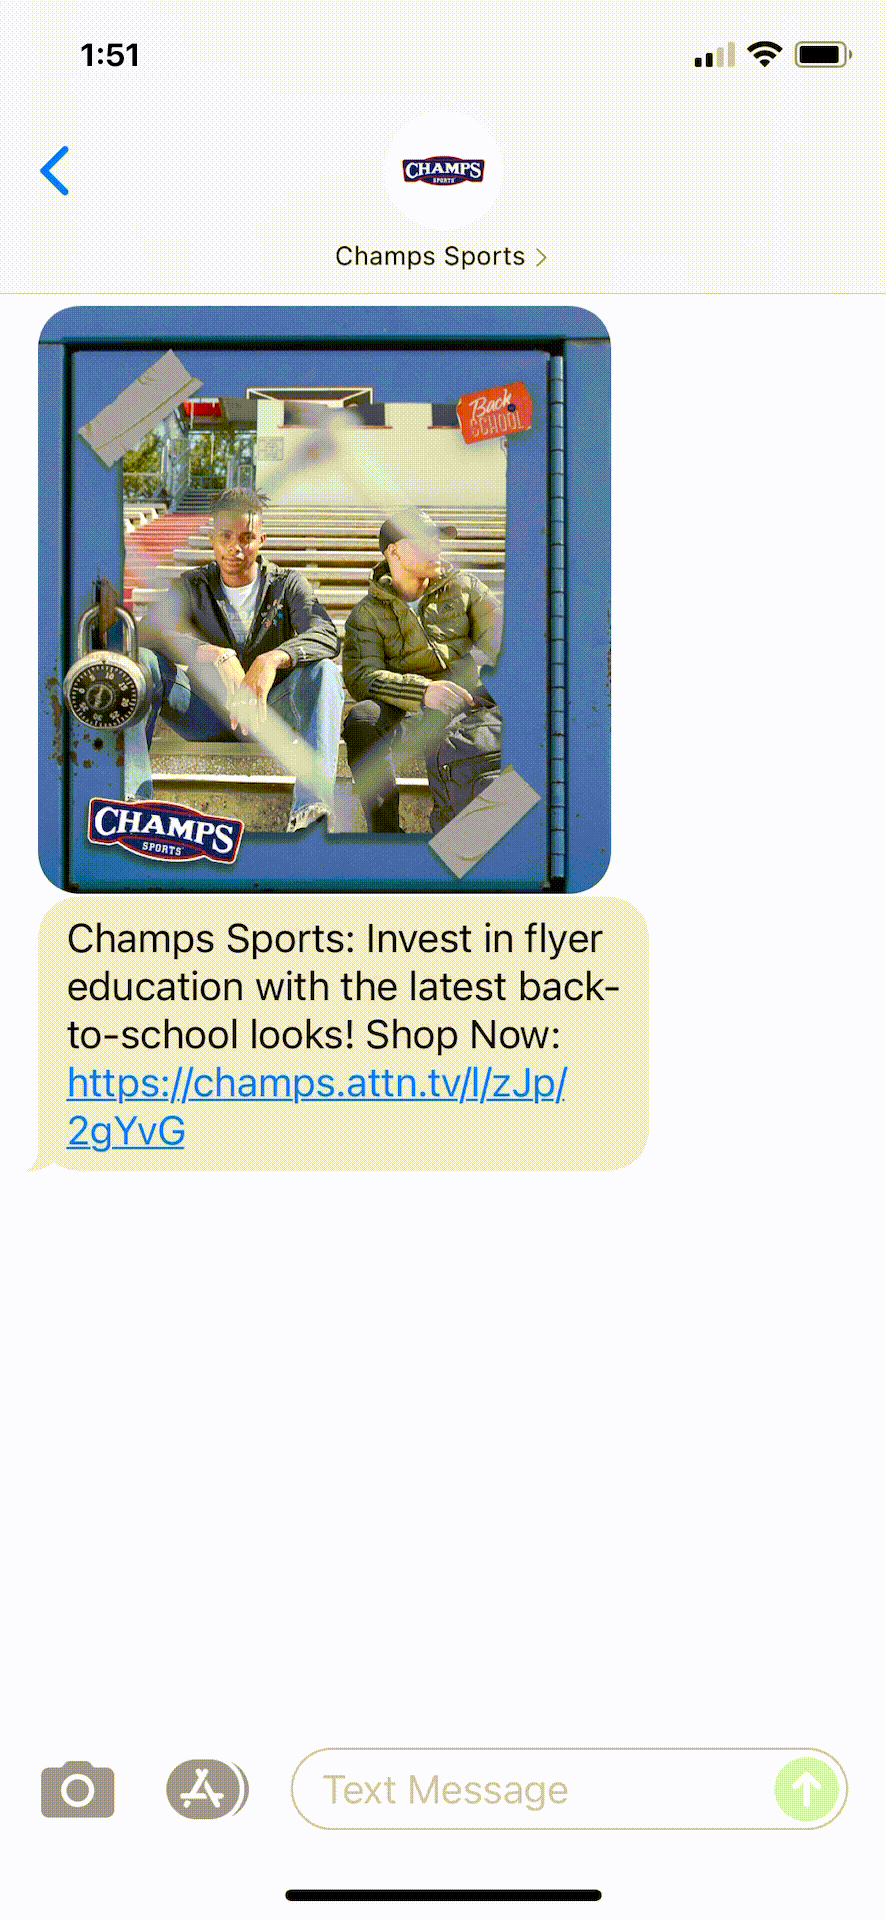 Champs-Sports-Text-Message-Marketing-Example-08.31.2021